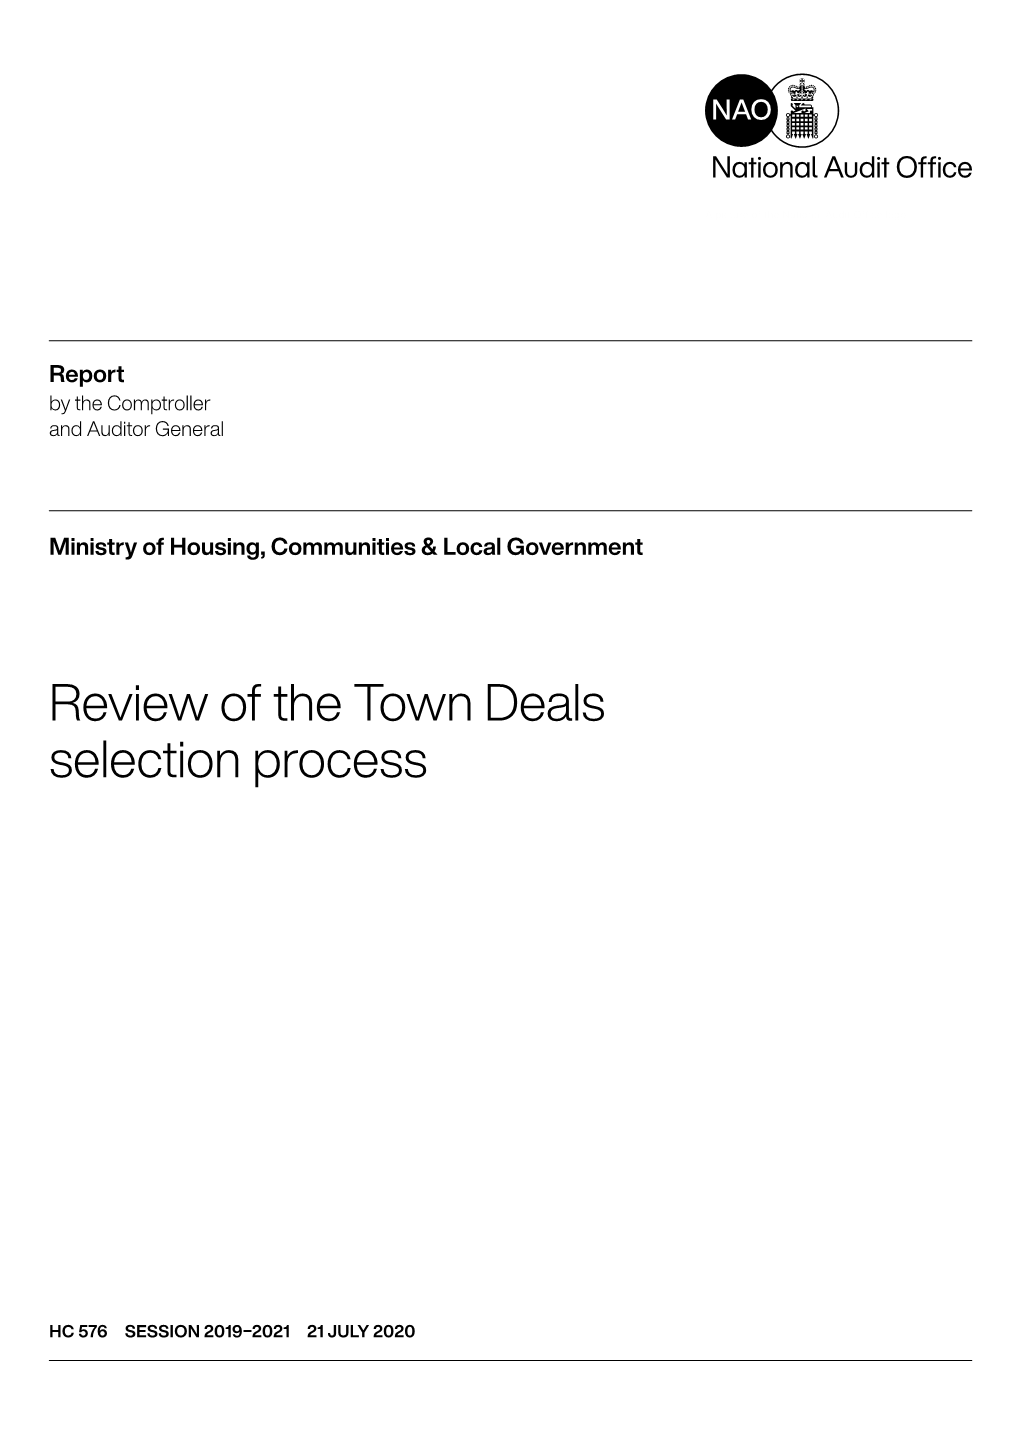 Review of the Towns Deals Selection Process